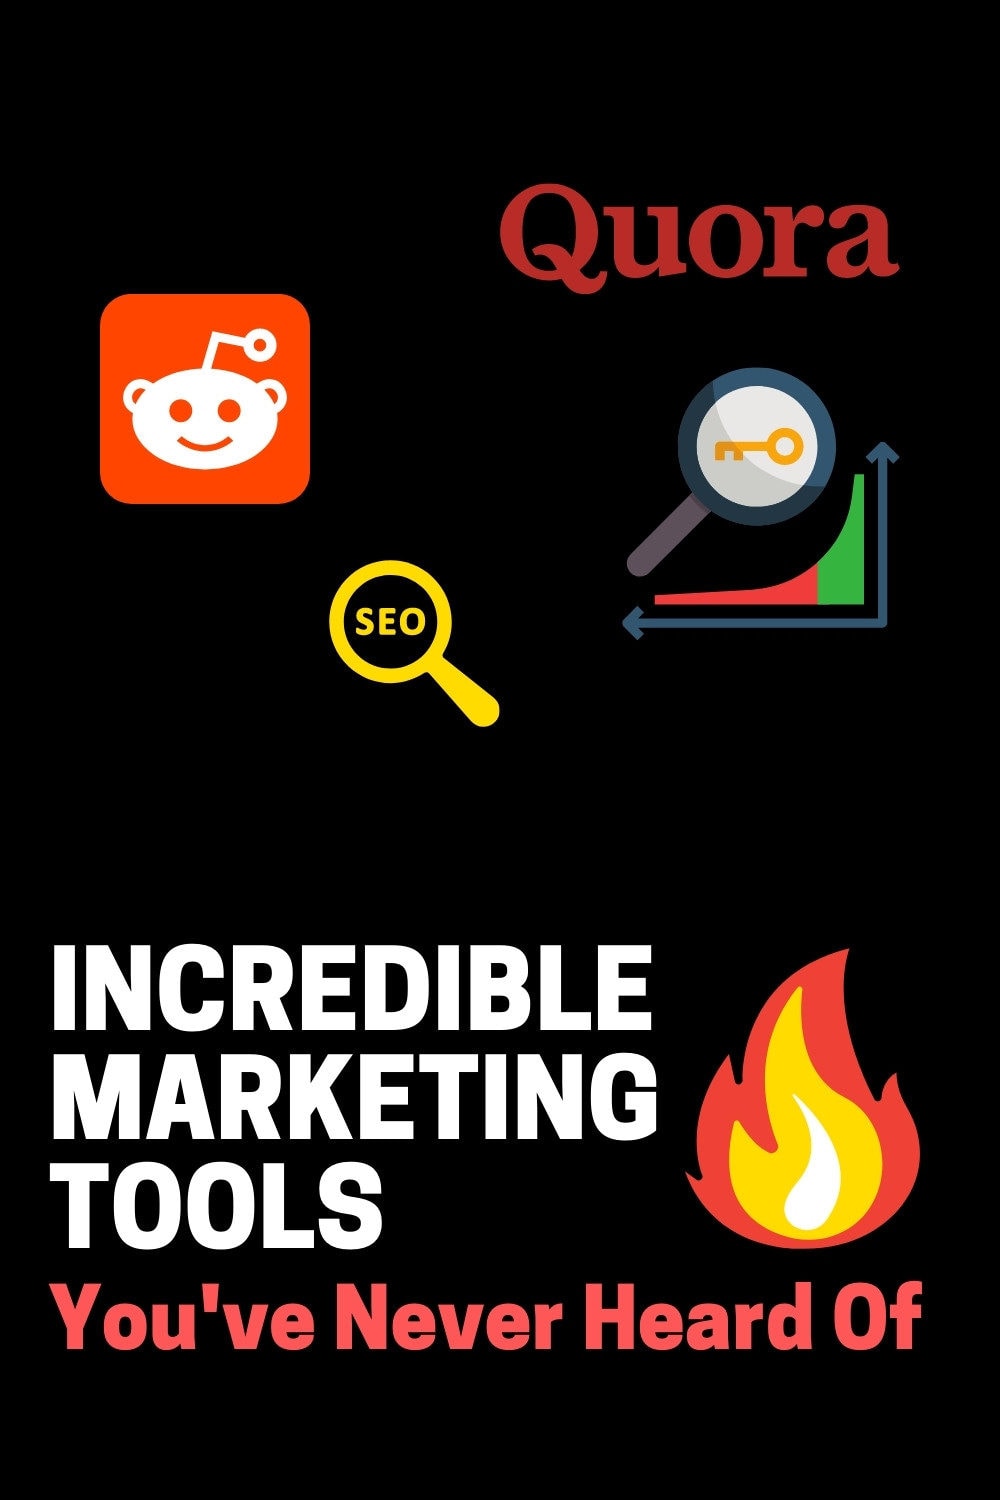 marketing tools for audience research reddit quora pinterest